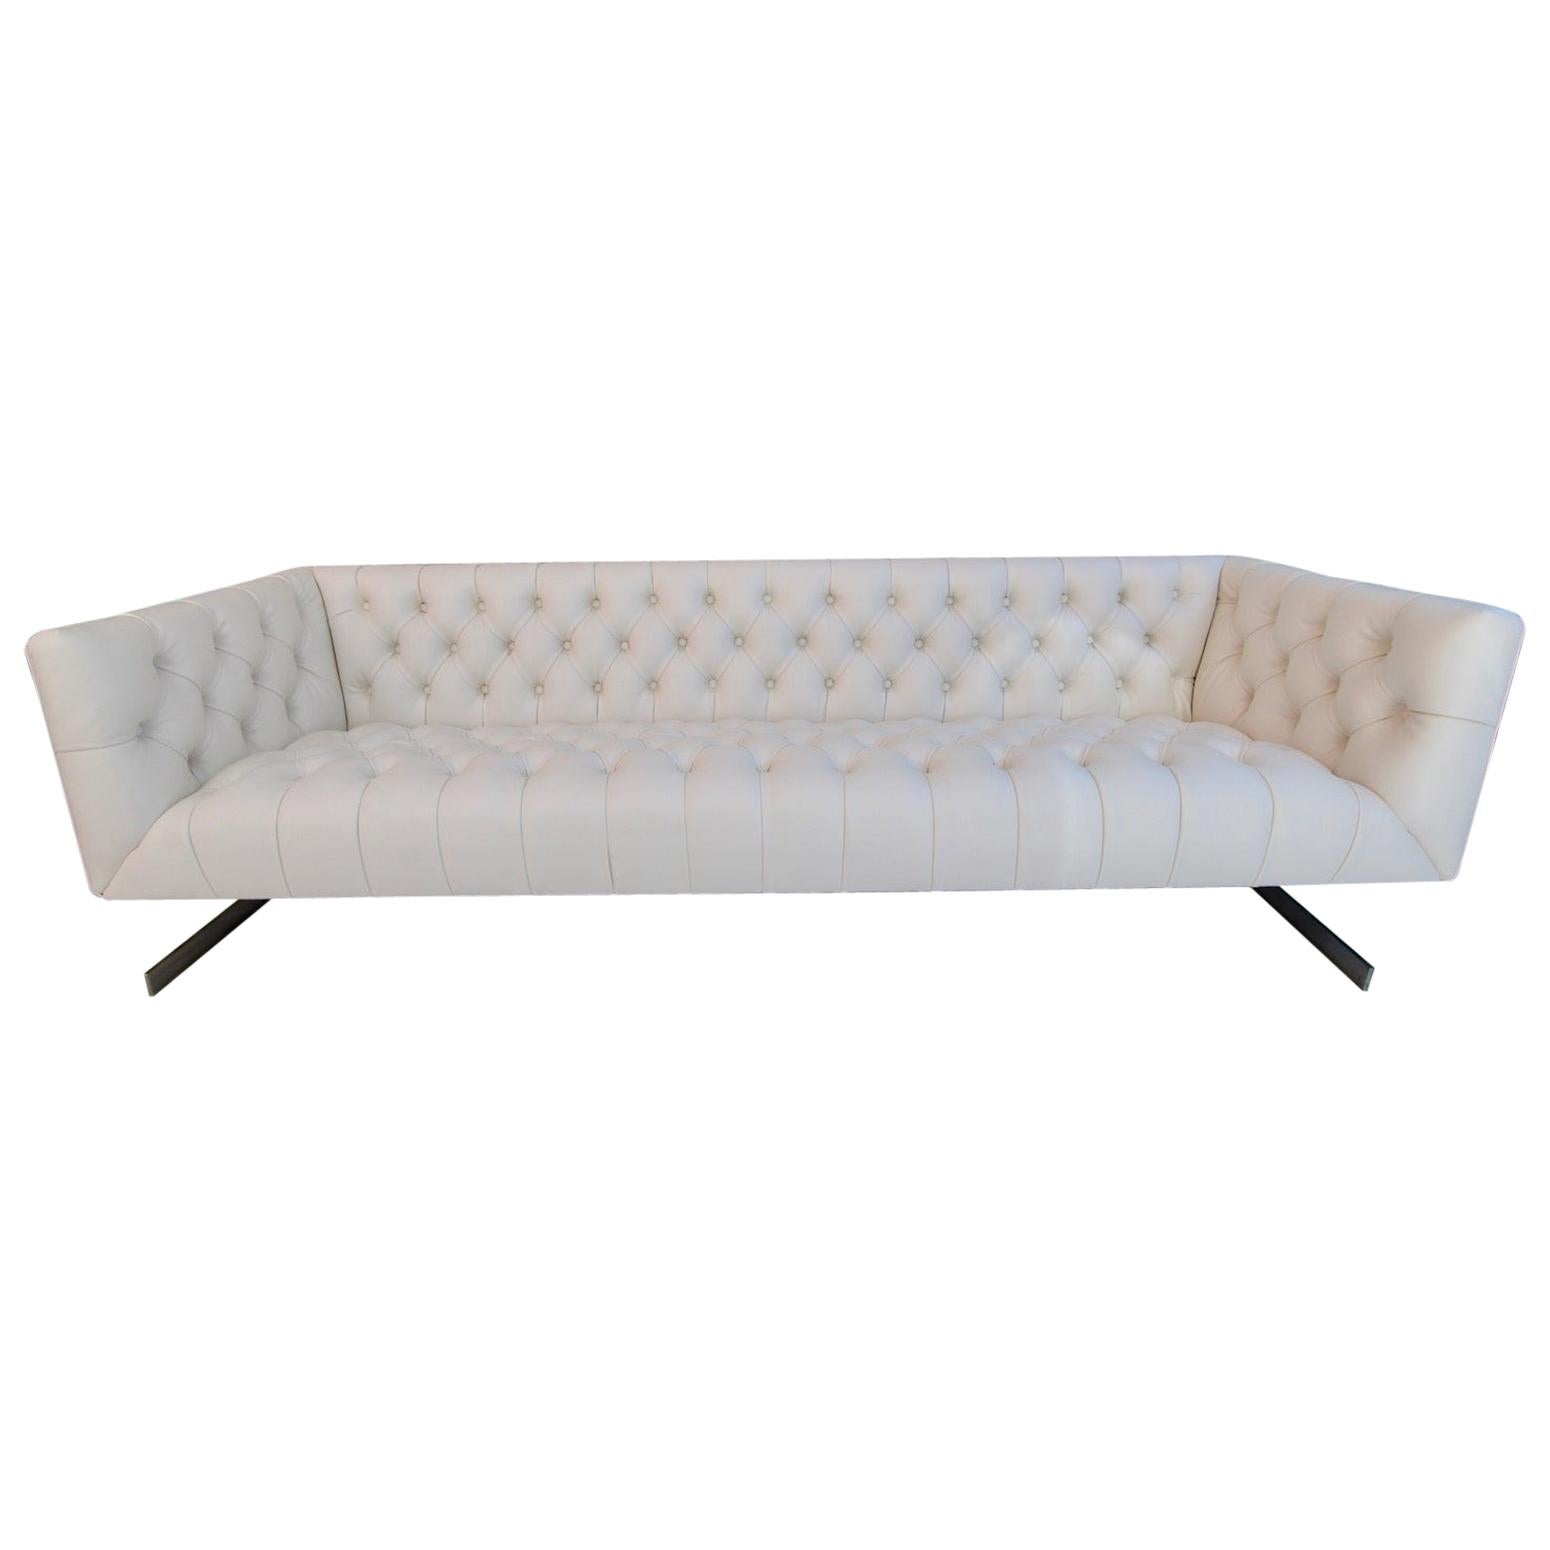 Rare and Sexy Large Sofa Cantilever Design Chesterfield Style For Sale